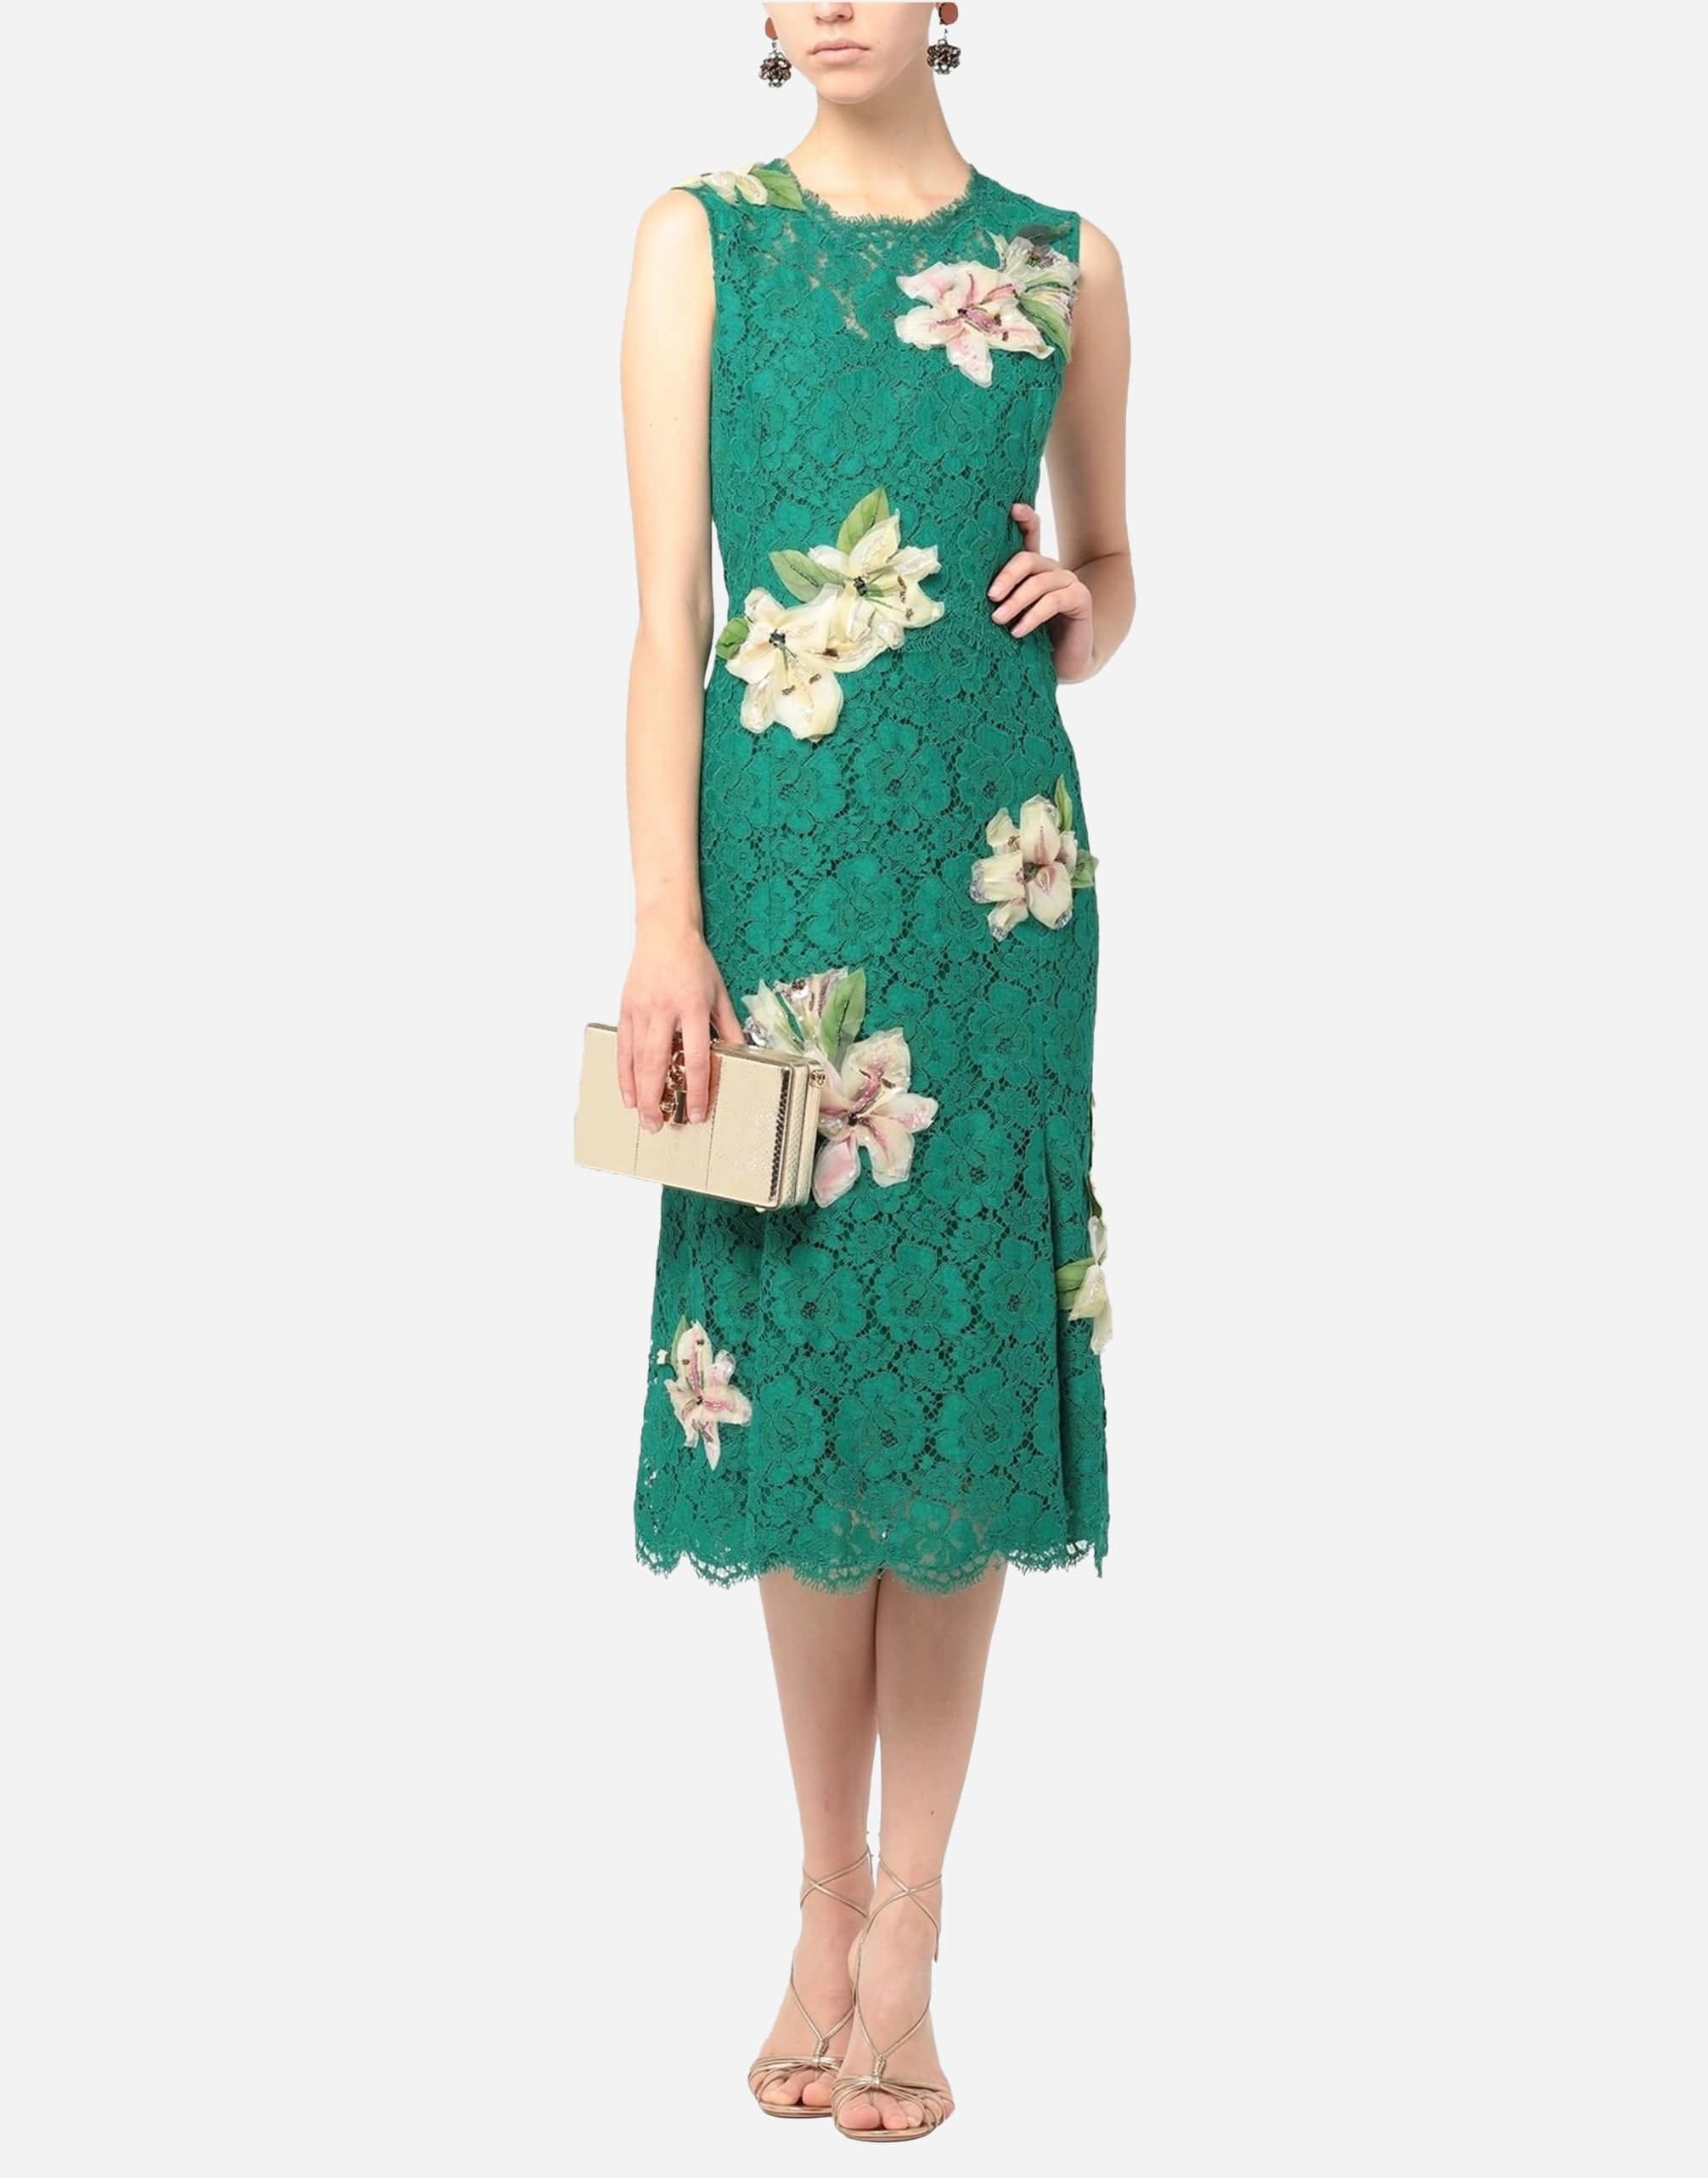 Lace Floral Appliqued Sleeveless Dress